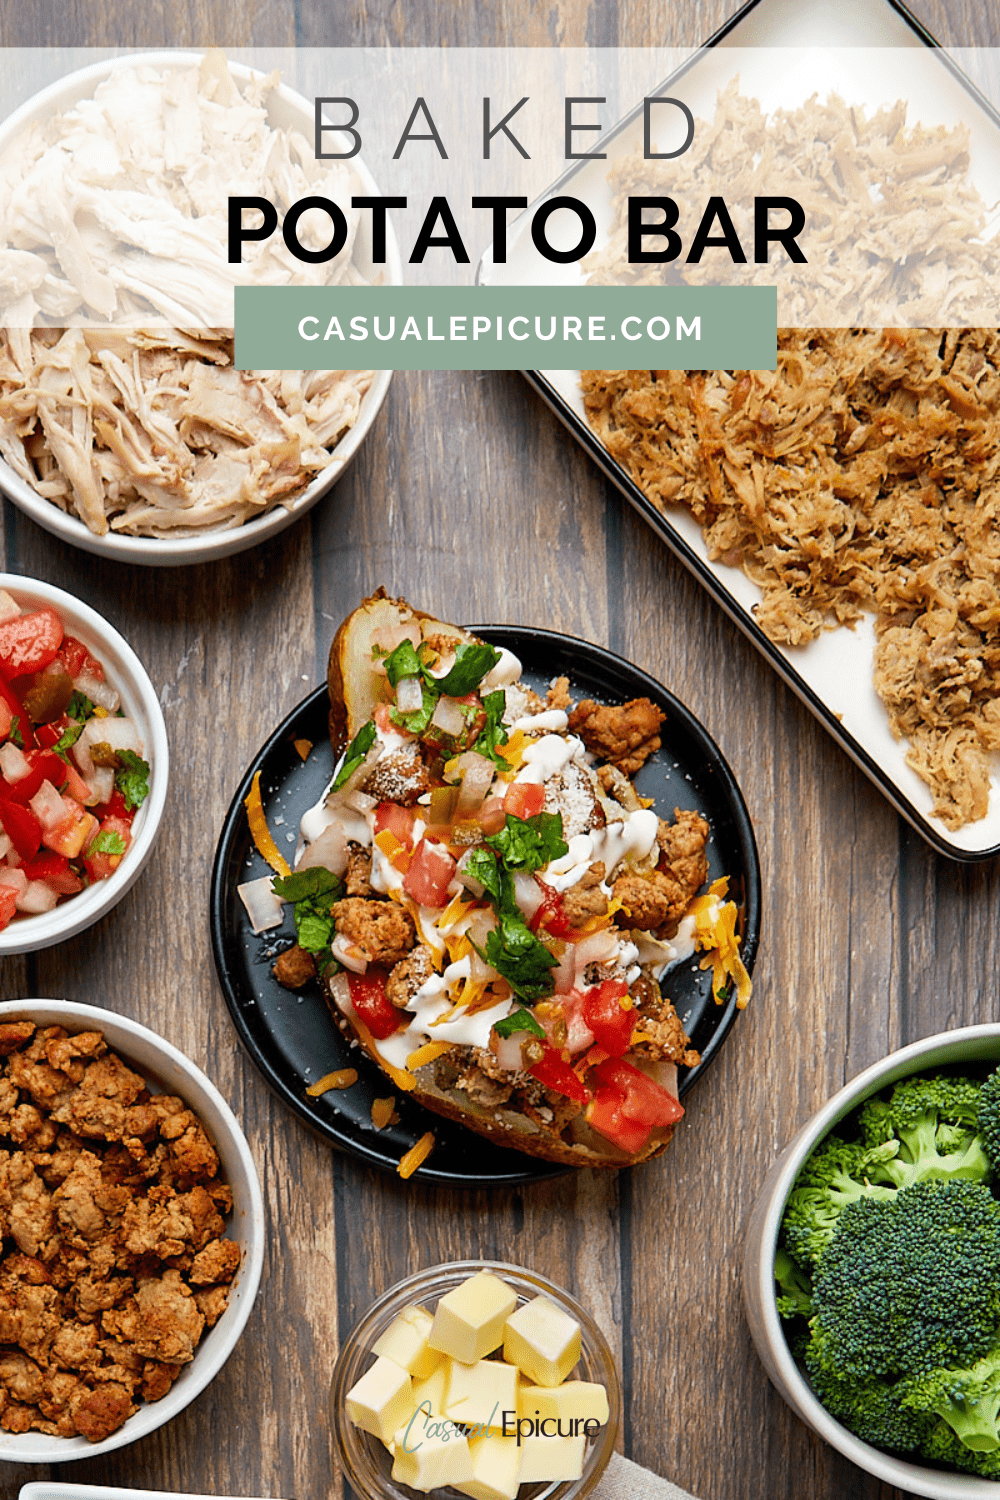 20 Toppings Every Baked Potato Bar Needs | Casual Epicure